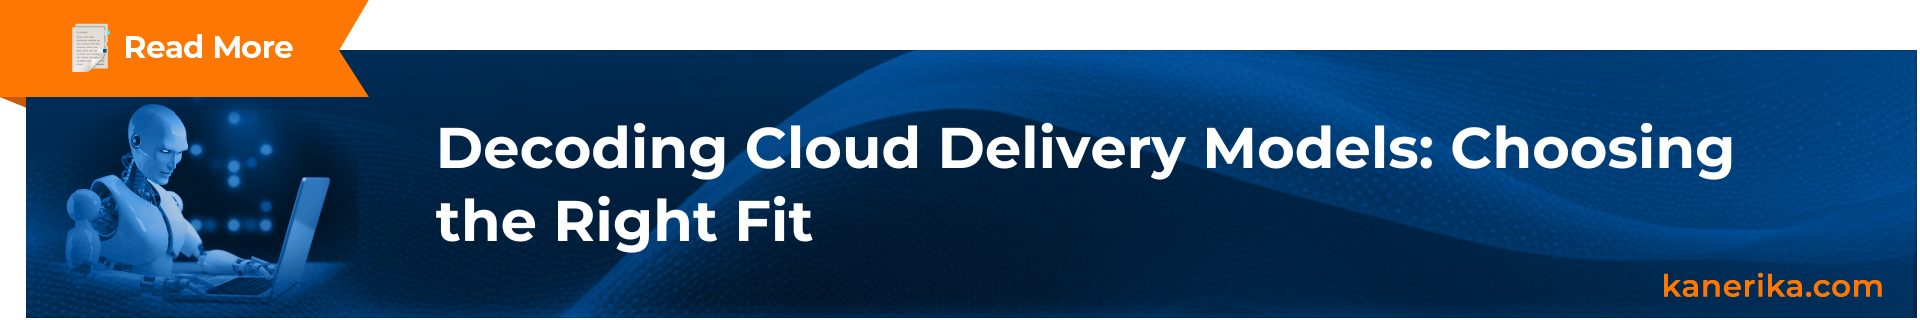 Read more on cloud delivery models 